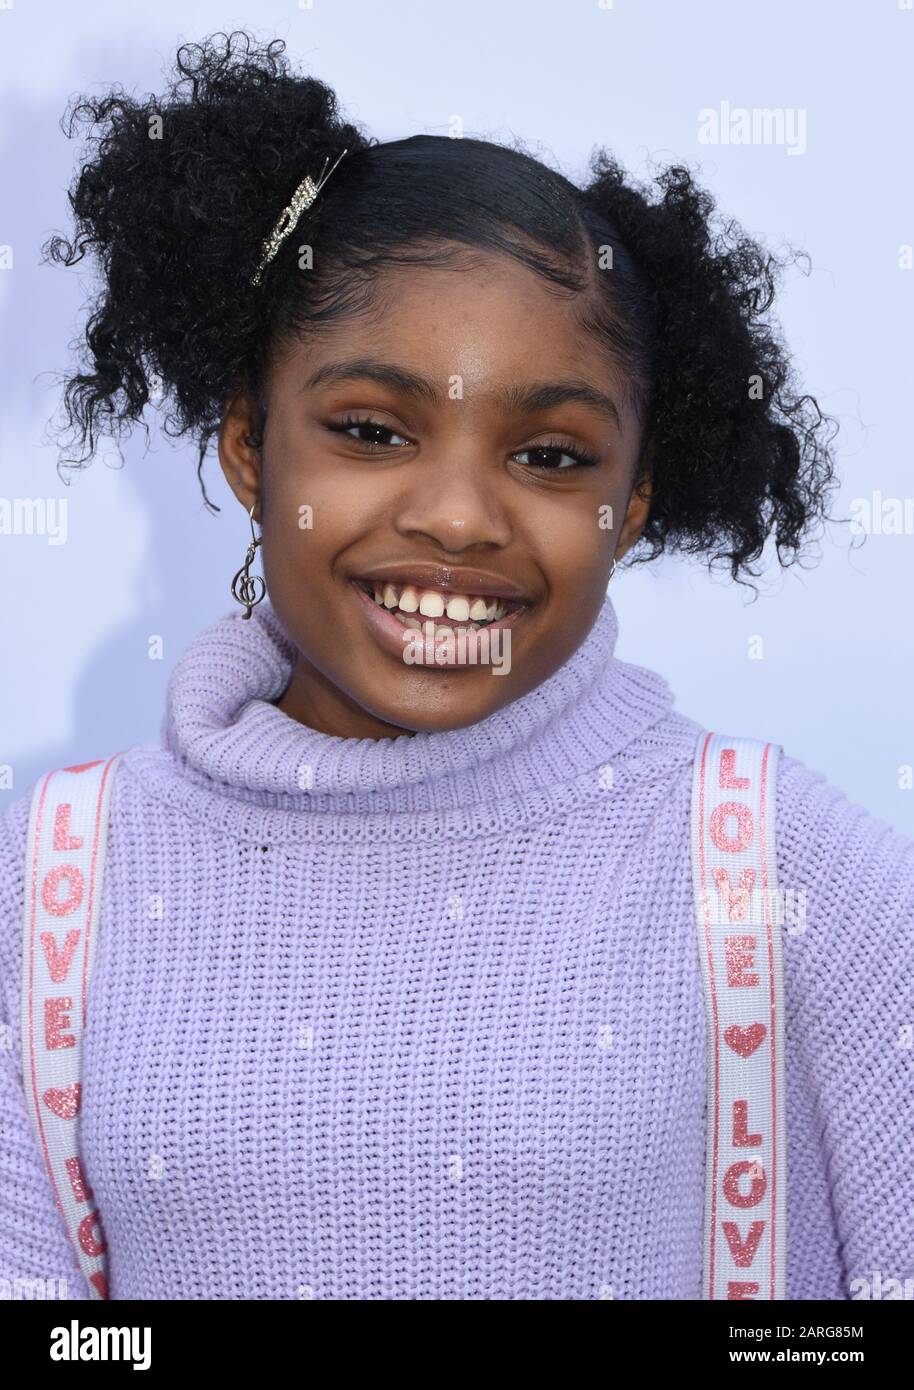 Los Angeles, California, USA 25th January 2020 Actress Brianni Walker  attends Paramount Pictures 'Sonic The Hedgehog' Family Day Event on January  25, 2020 at Paramount Studios in Los Angeles, California, USA. Photo